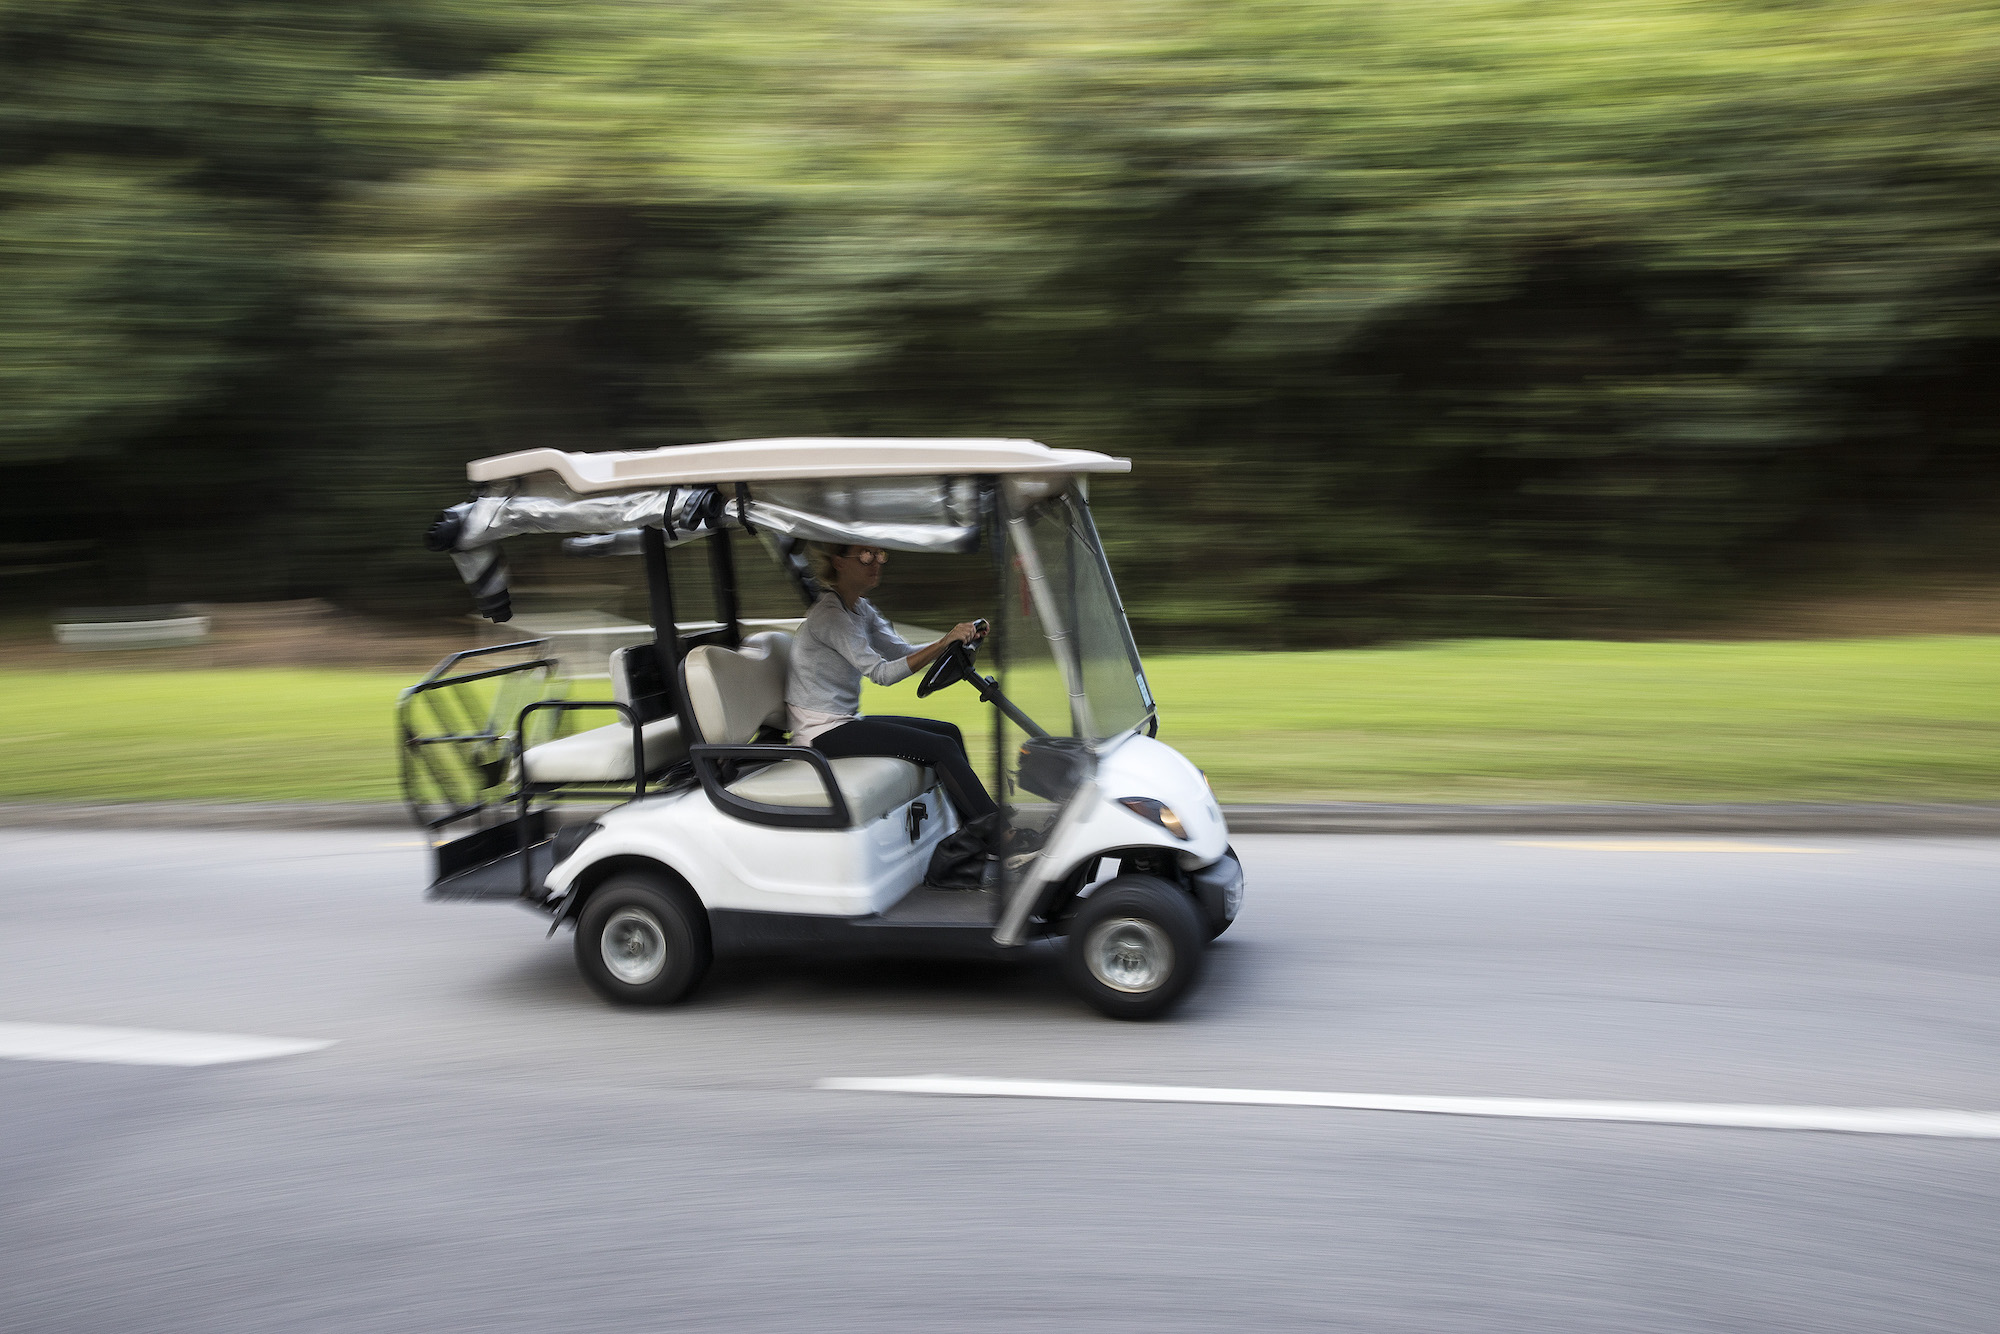 A white golf cart travels on a residential road along green grass and lush trees